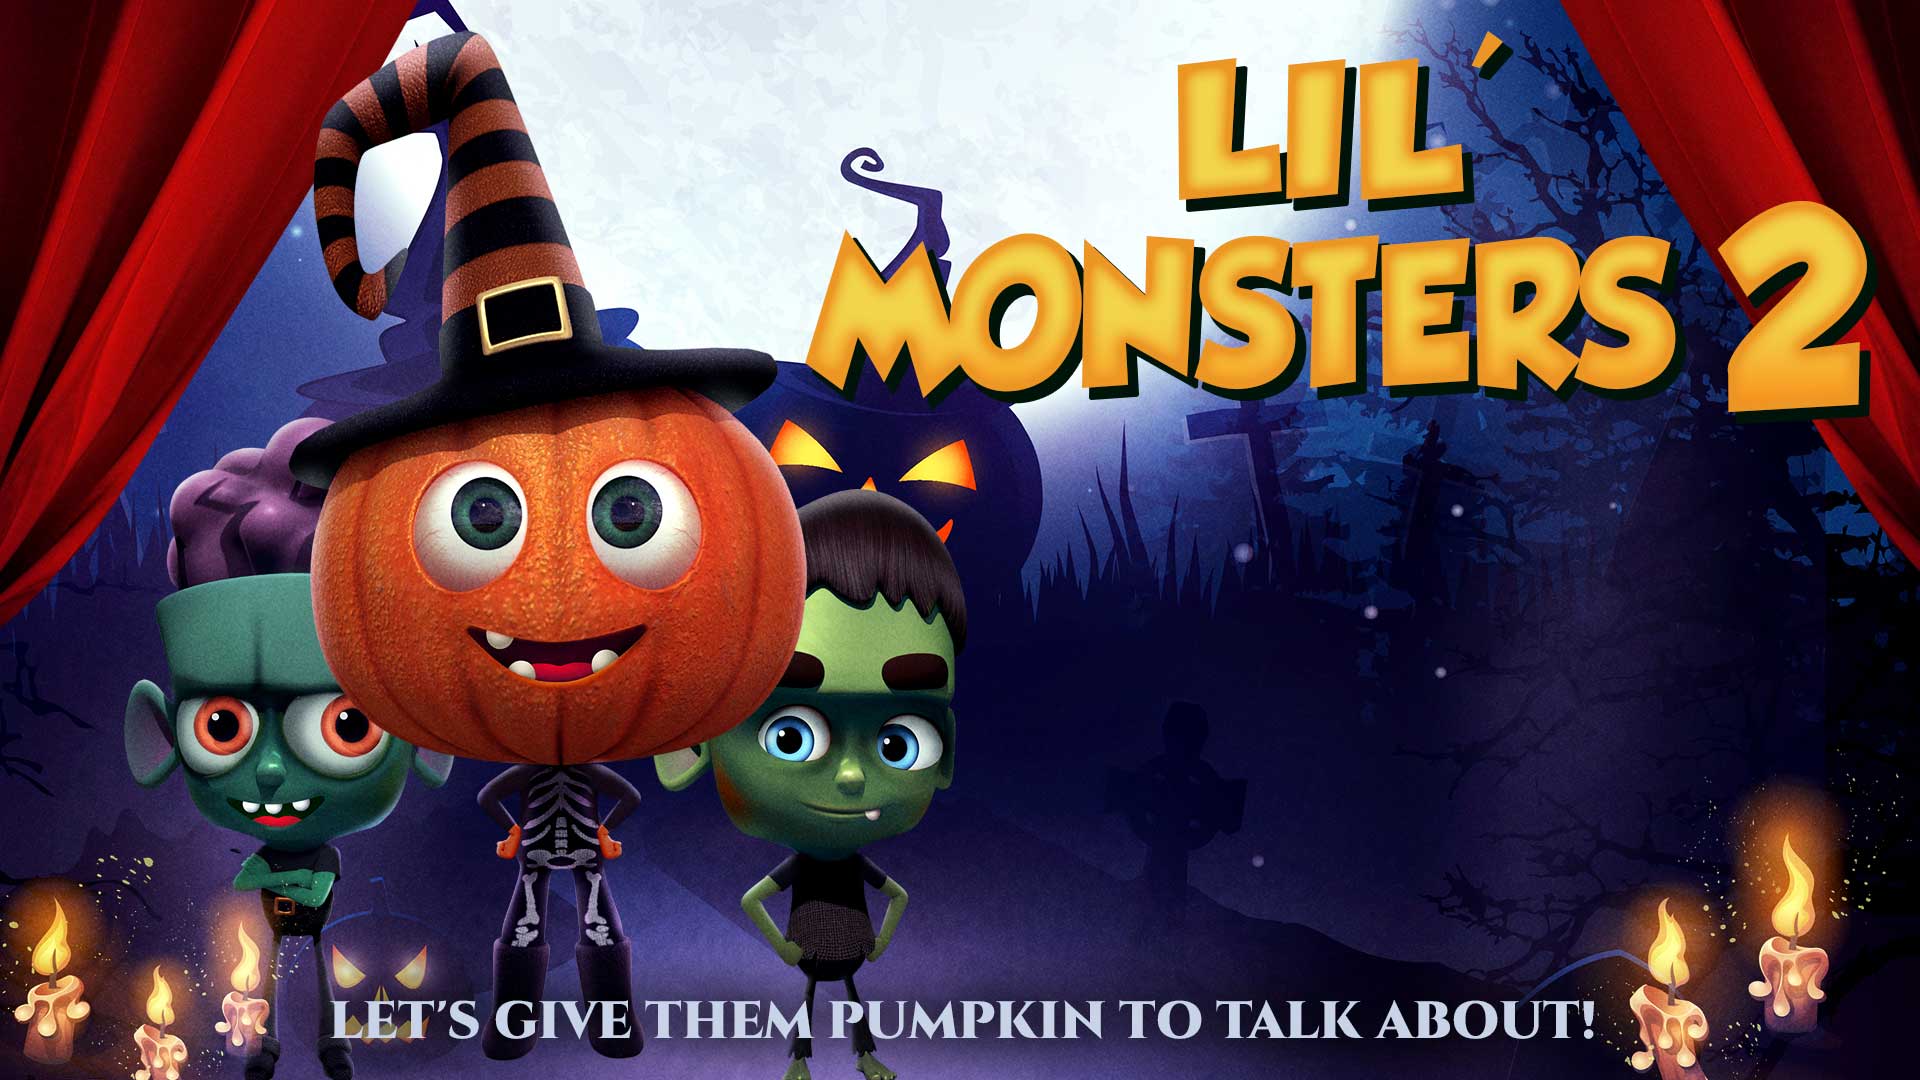 Lil' Monsters 2